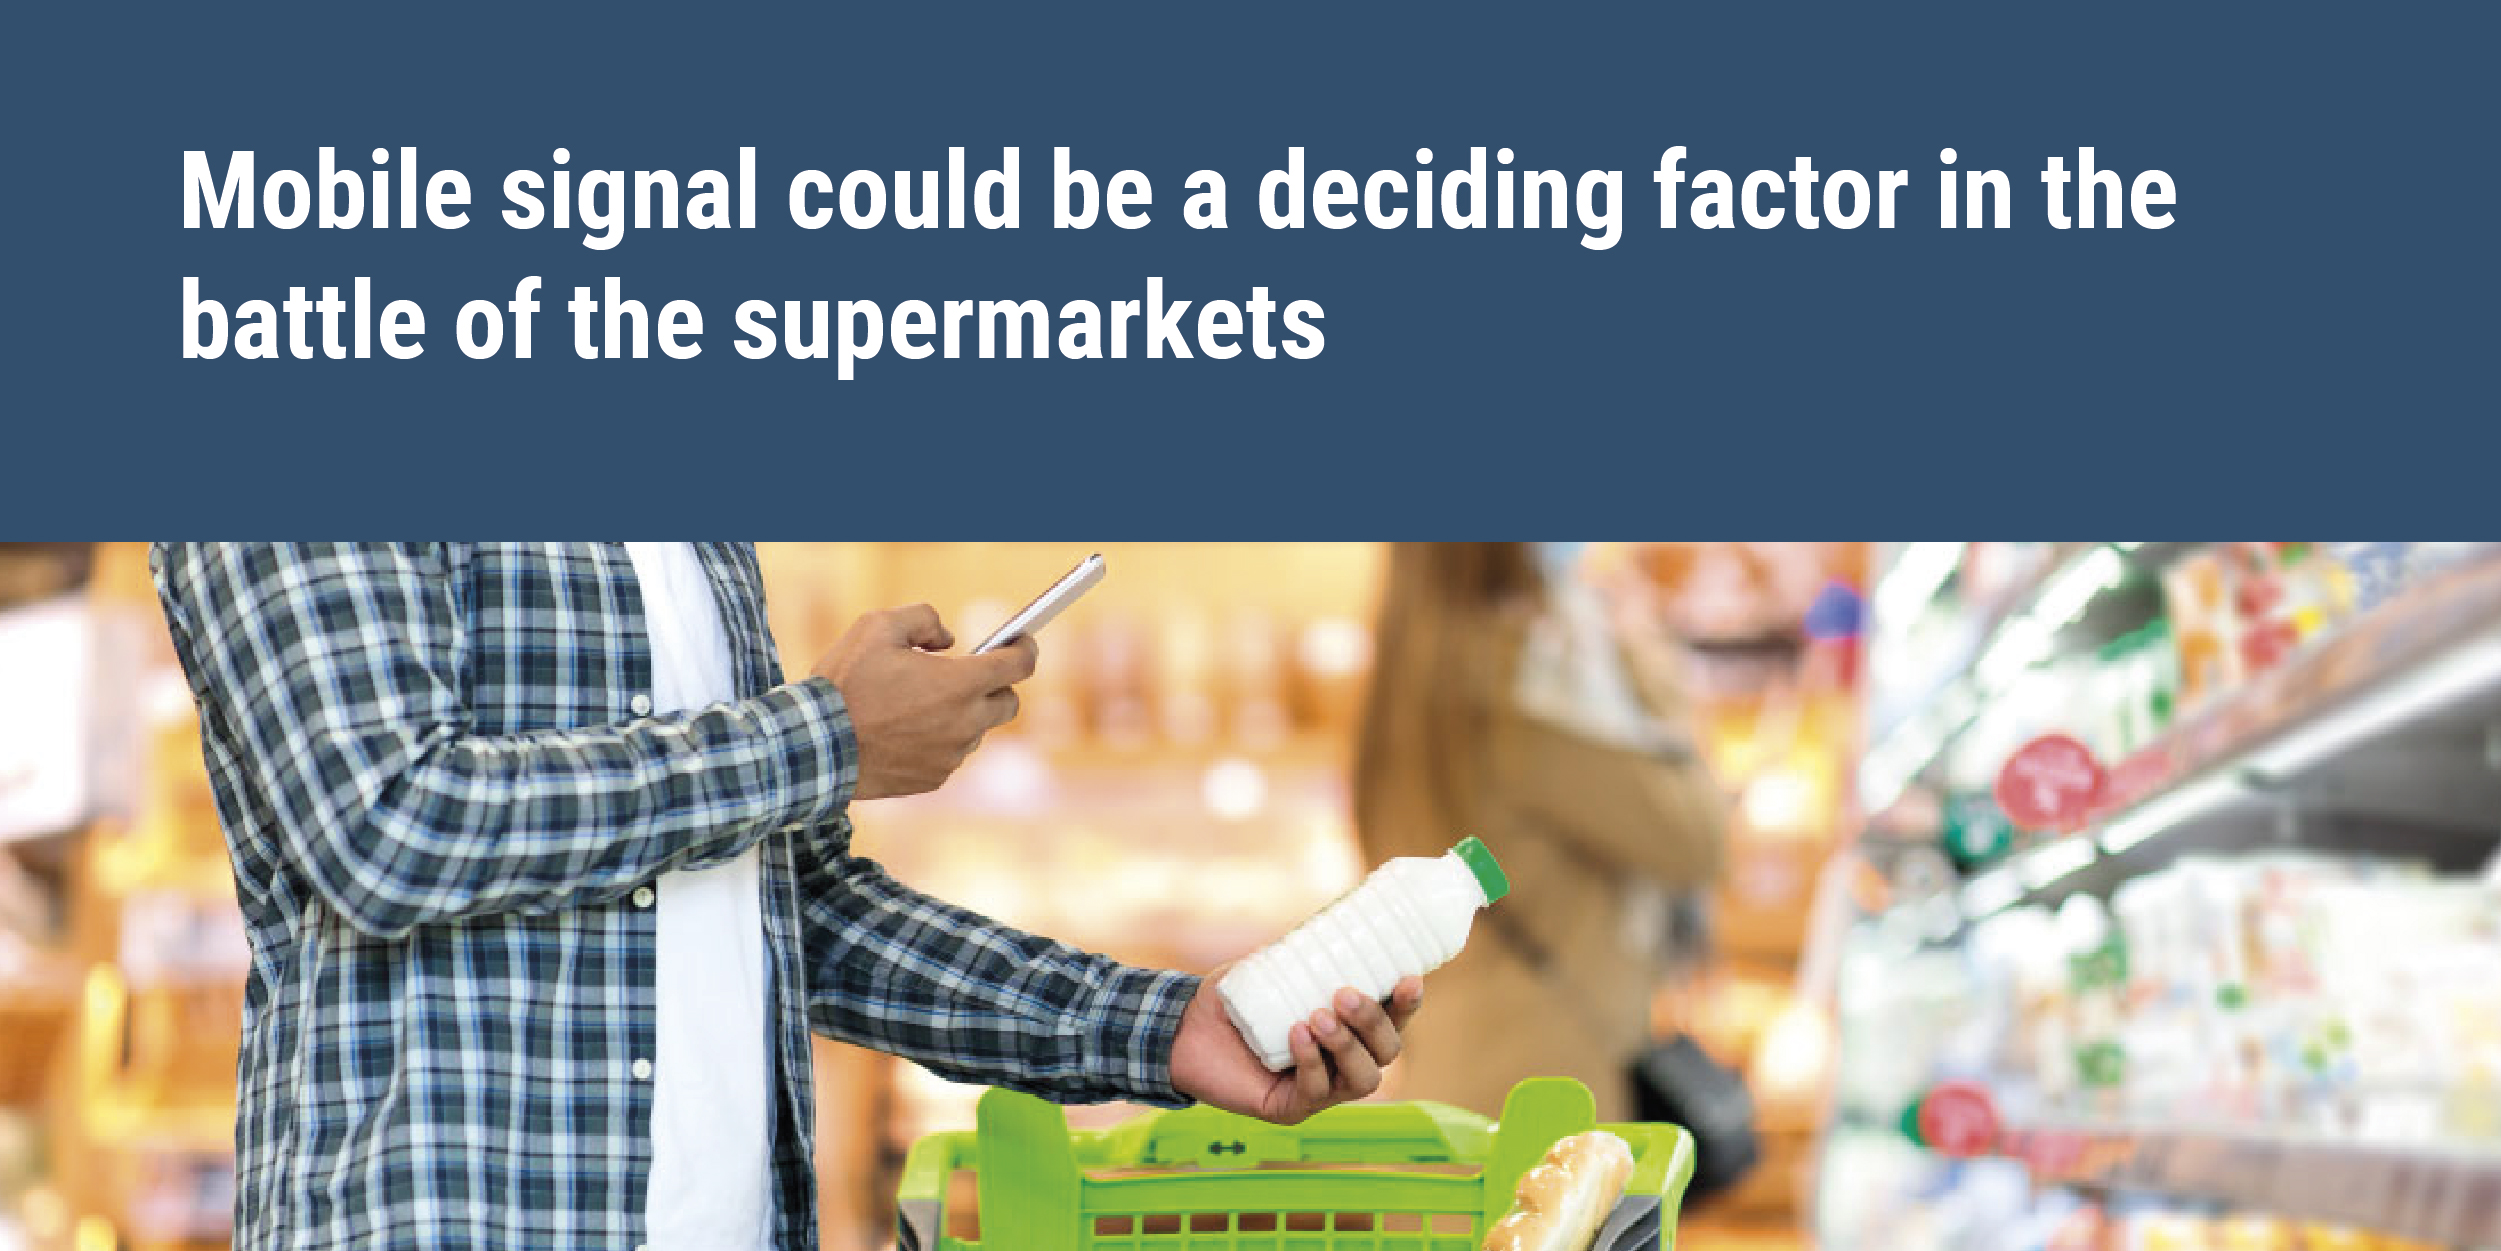 Mobile signal could be a deciding factor in the battle of the supermarkets - man on cellular phone in supermarket